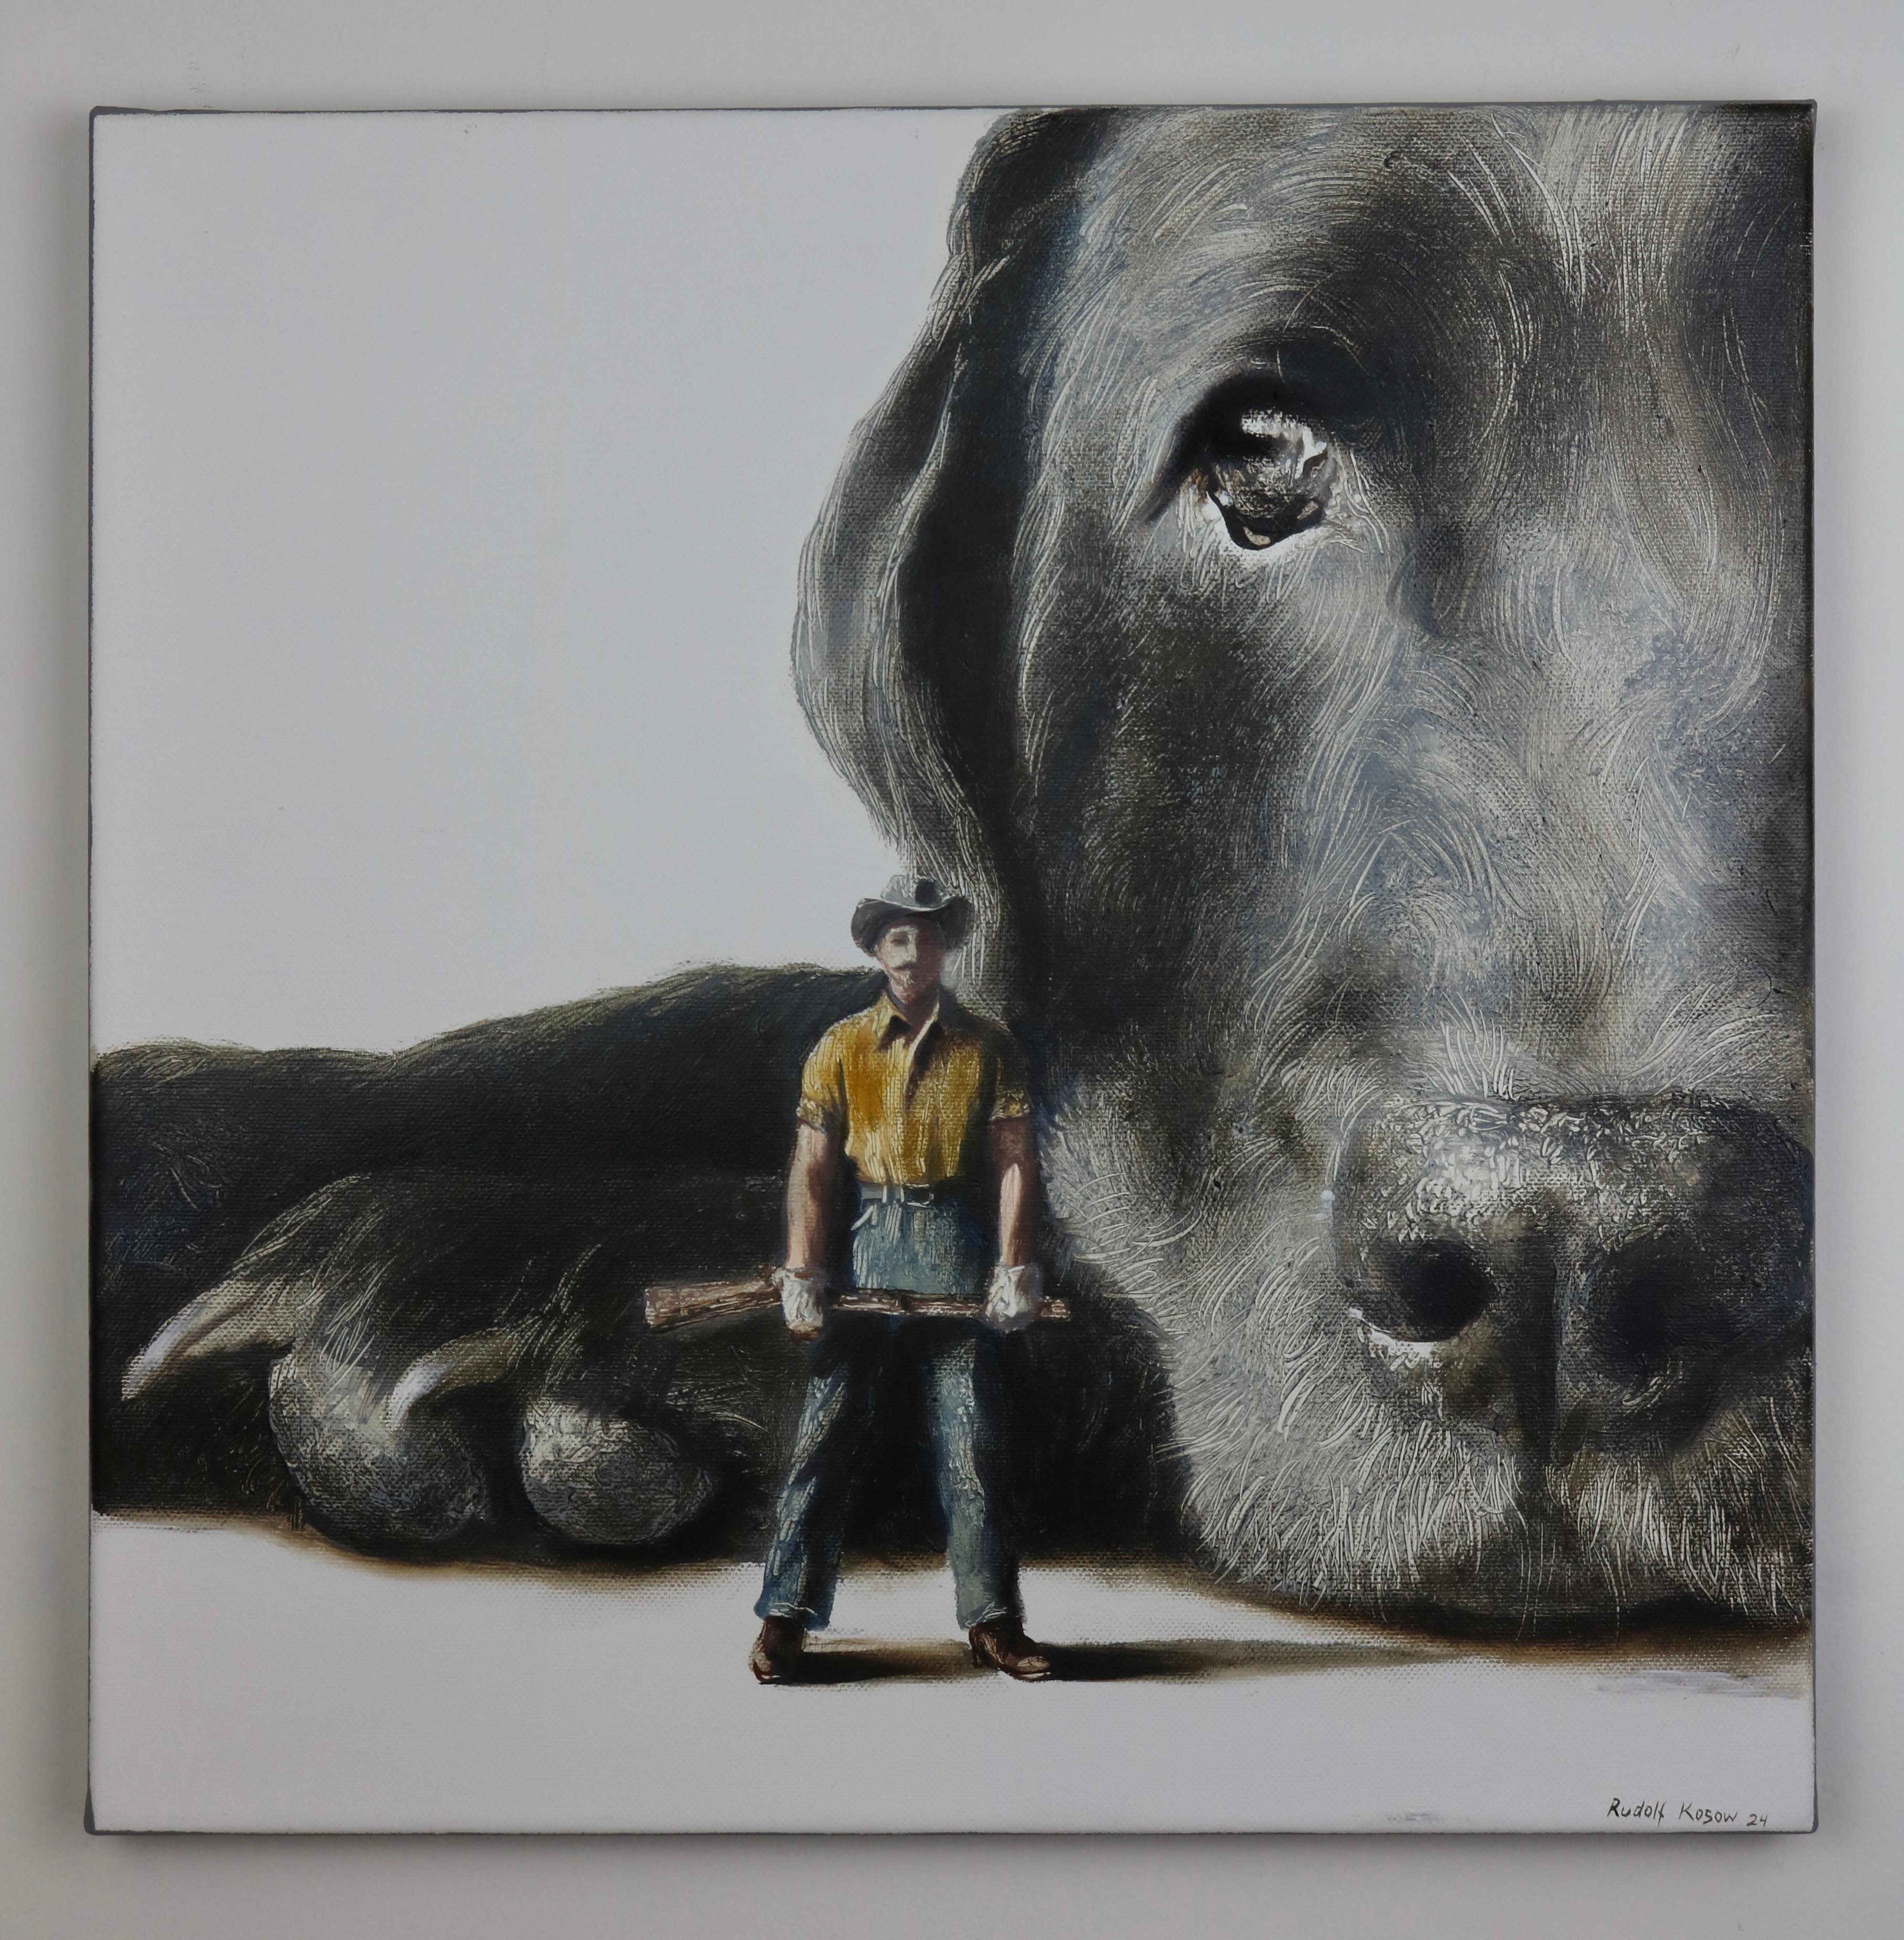 This poignant painting by Rudolf Kosow presents us with a remarkable visual allegory rich with surrealistic influences. The canvas is occupied by a colossal, detailed black labrador retriever's face gazing out with an expression that is at once